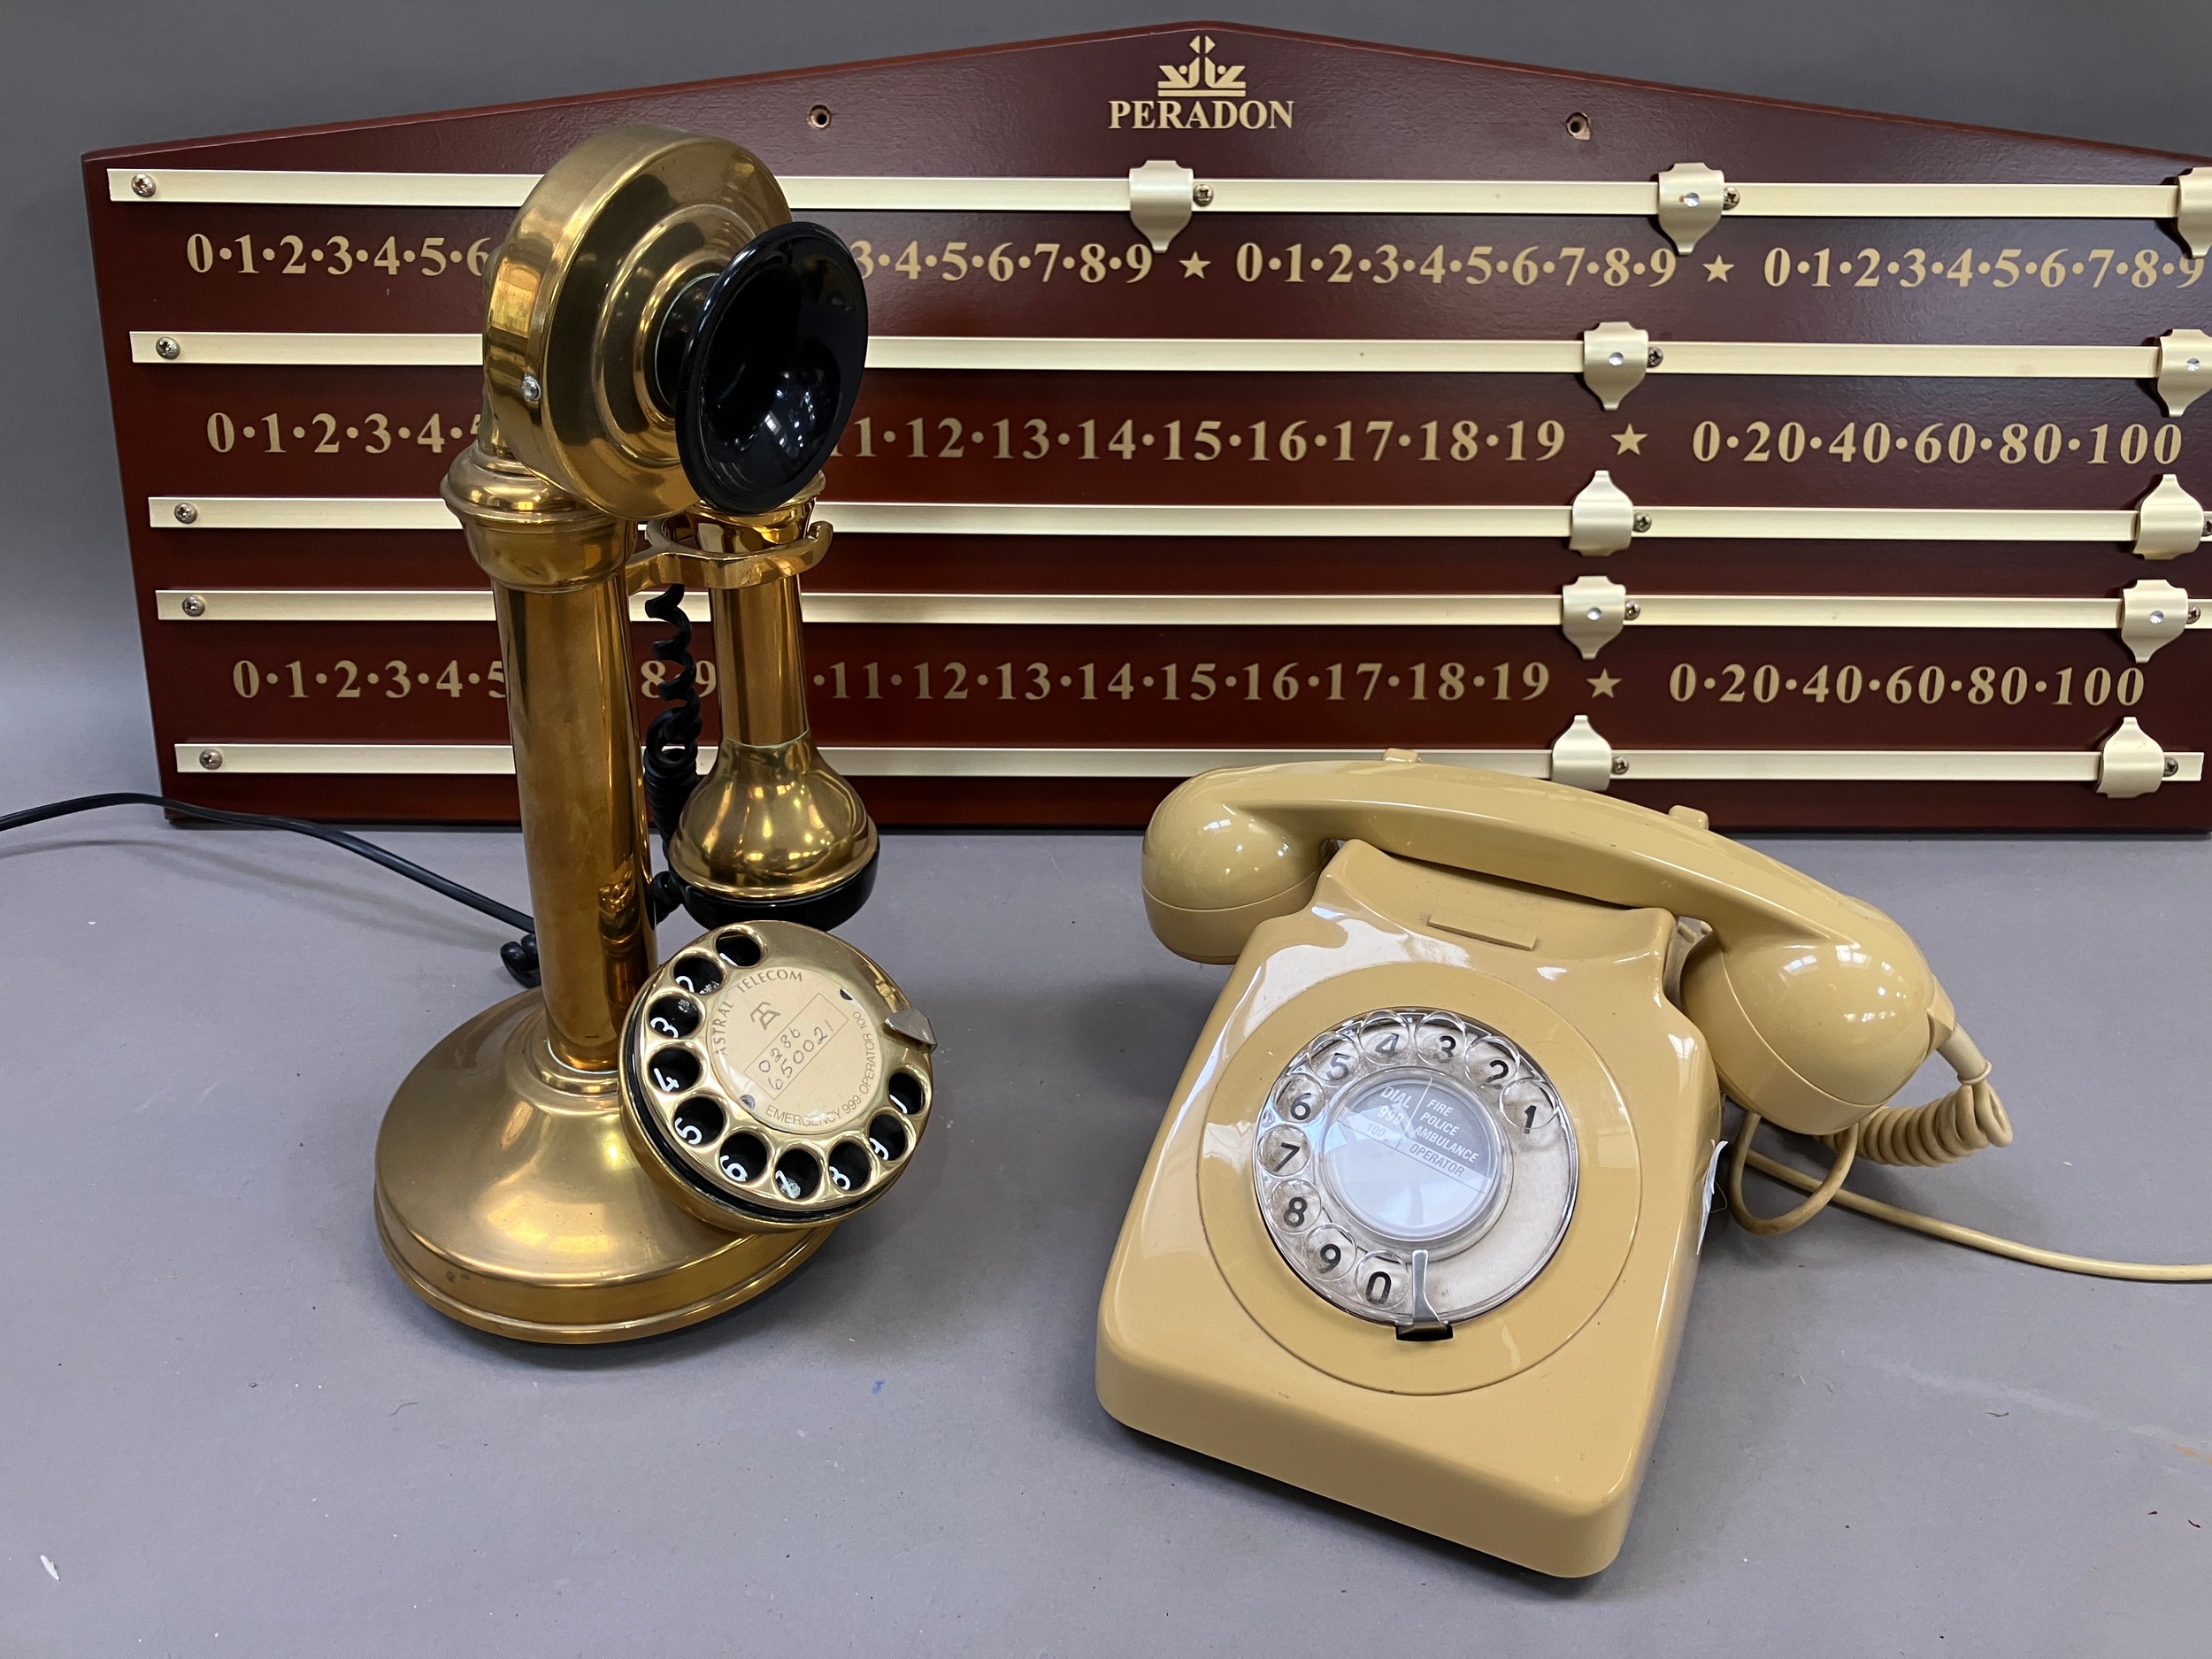 Two vintage telephones and a scoreboard - Image 2 of 2